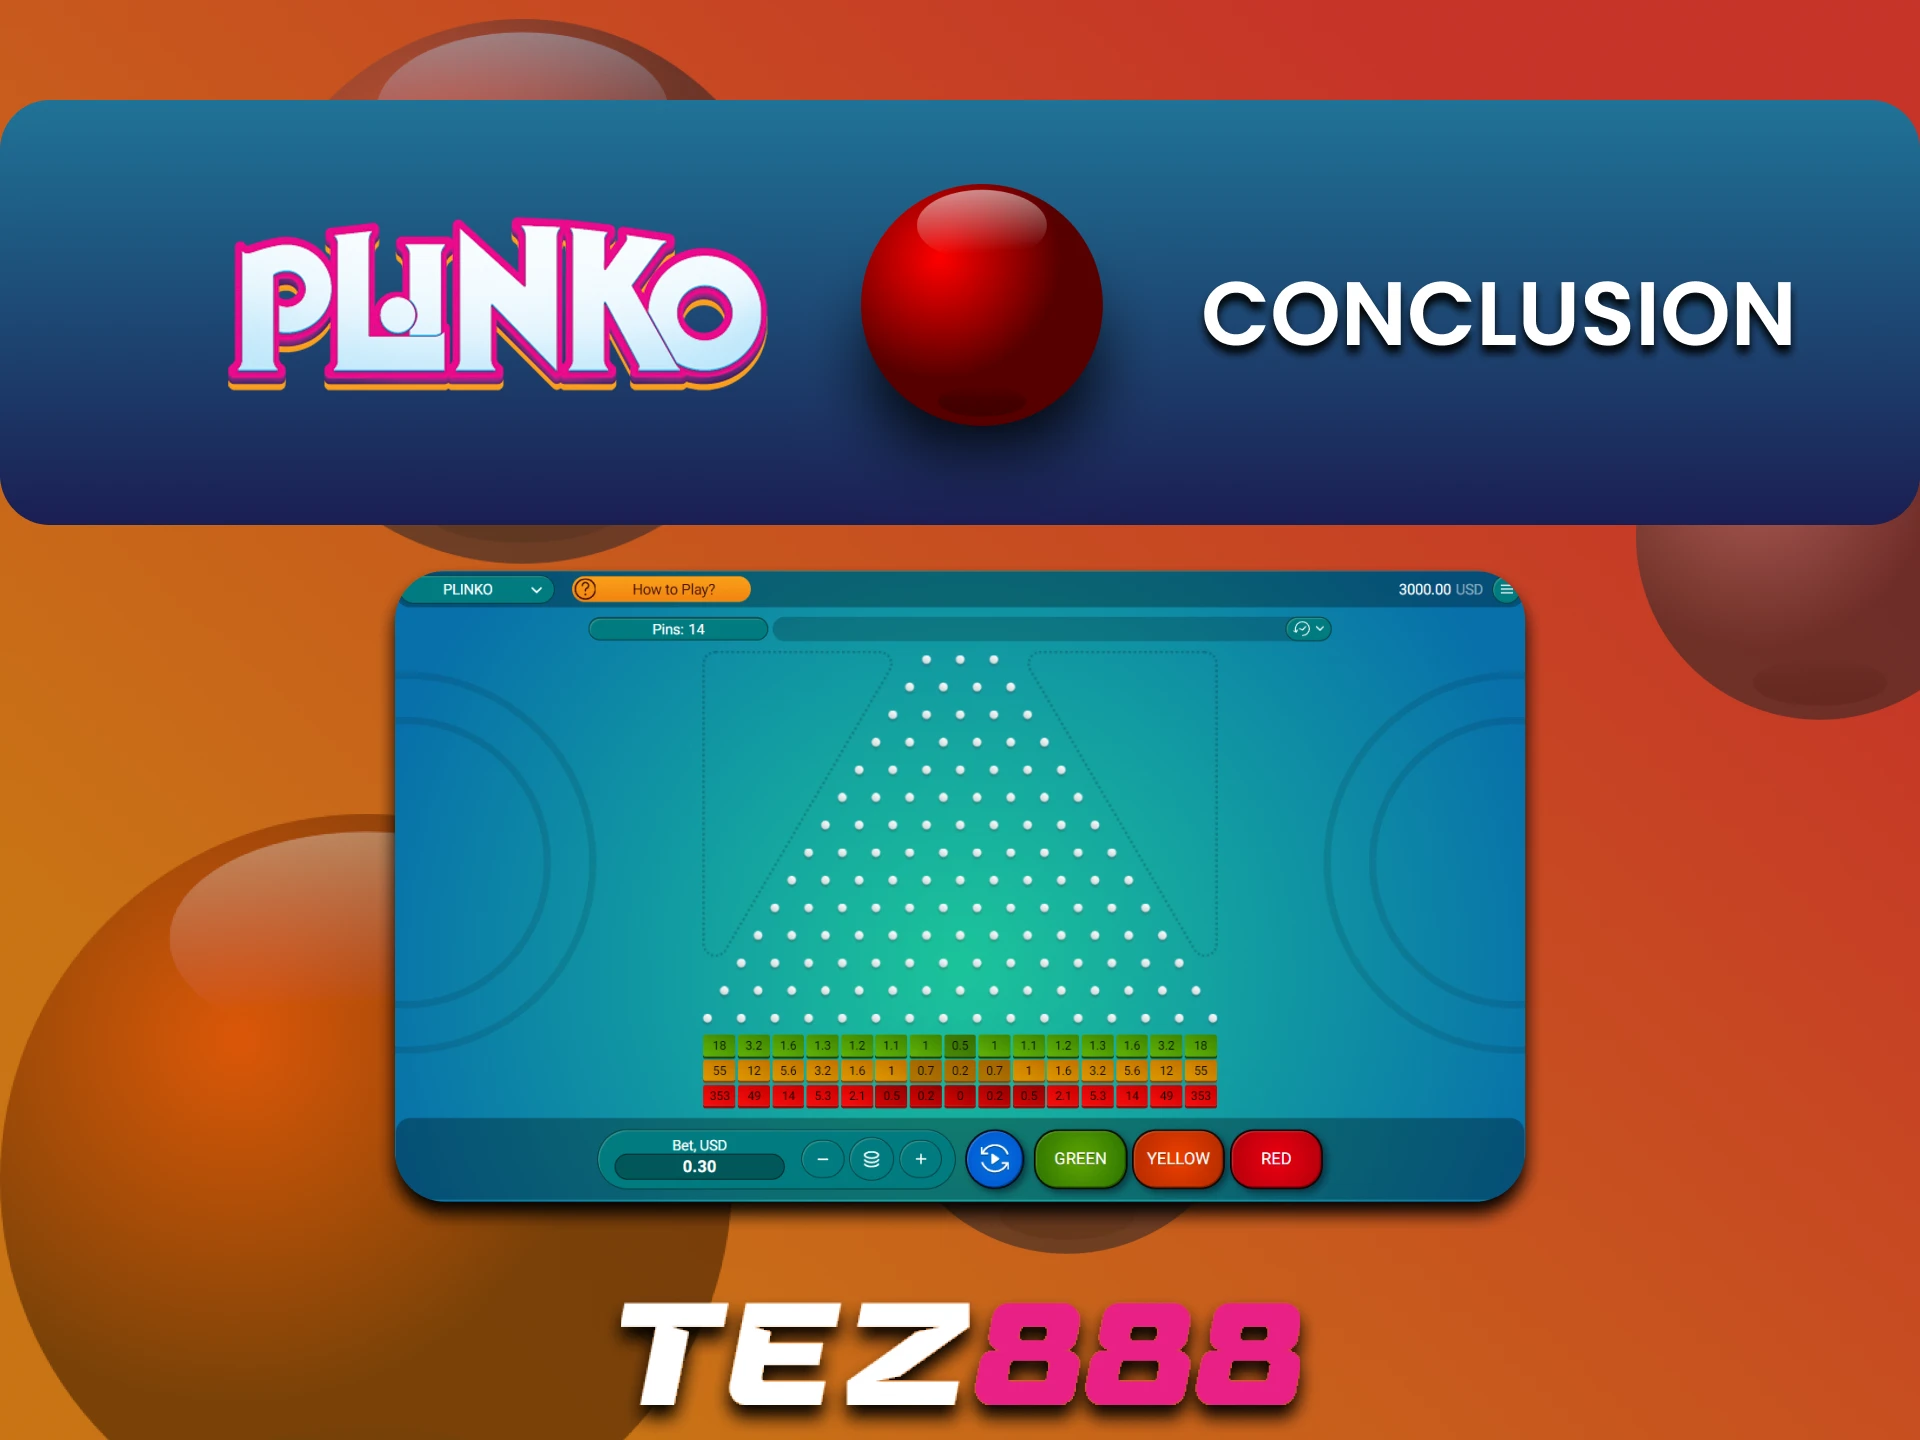 Tez888 is the right choice for Plinko.